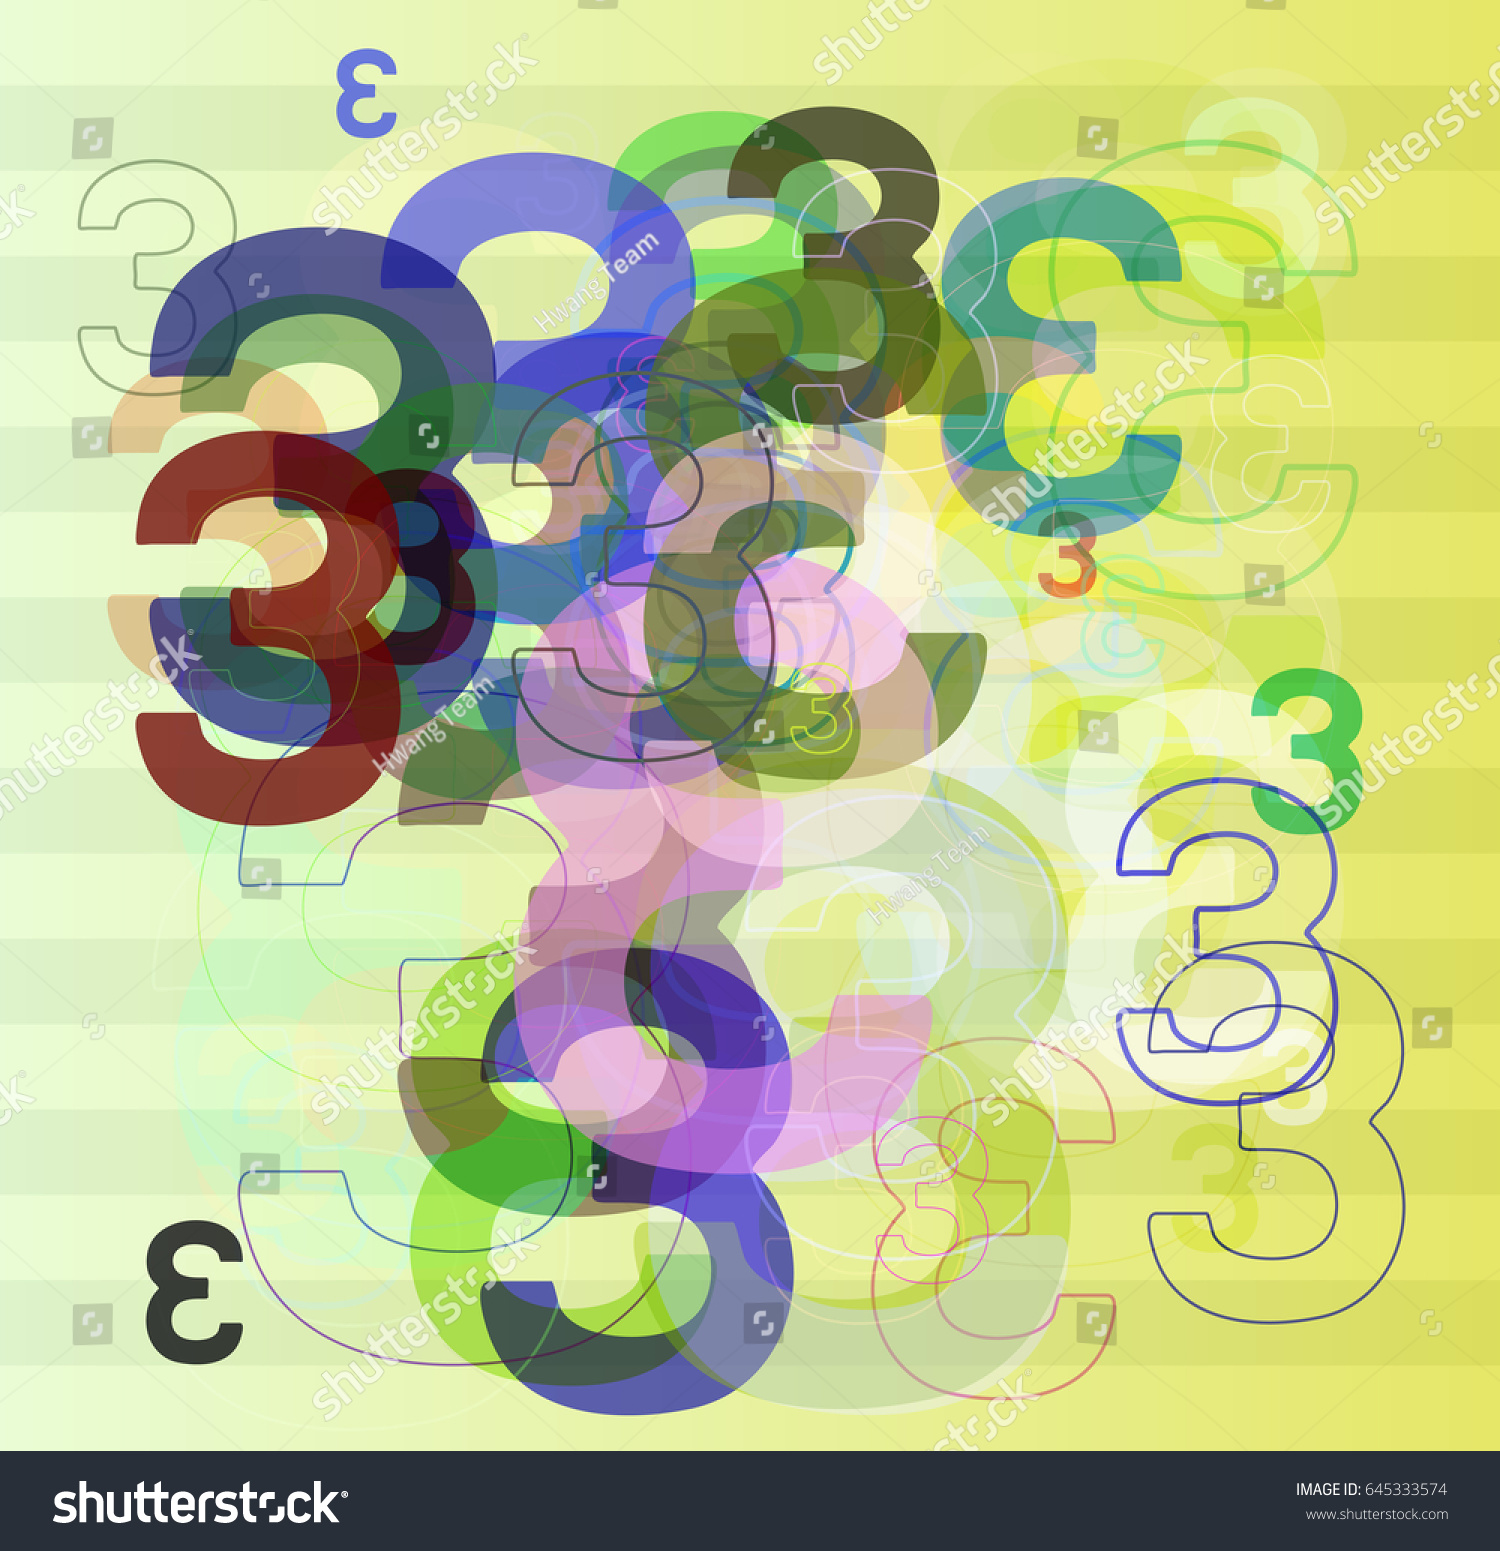 number-3-pattern-design-stock-vector-royalty-free-645333574